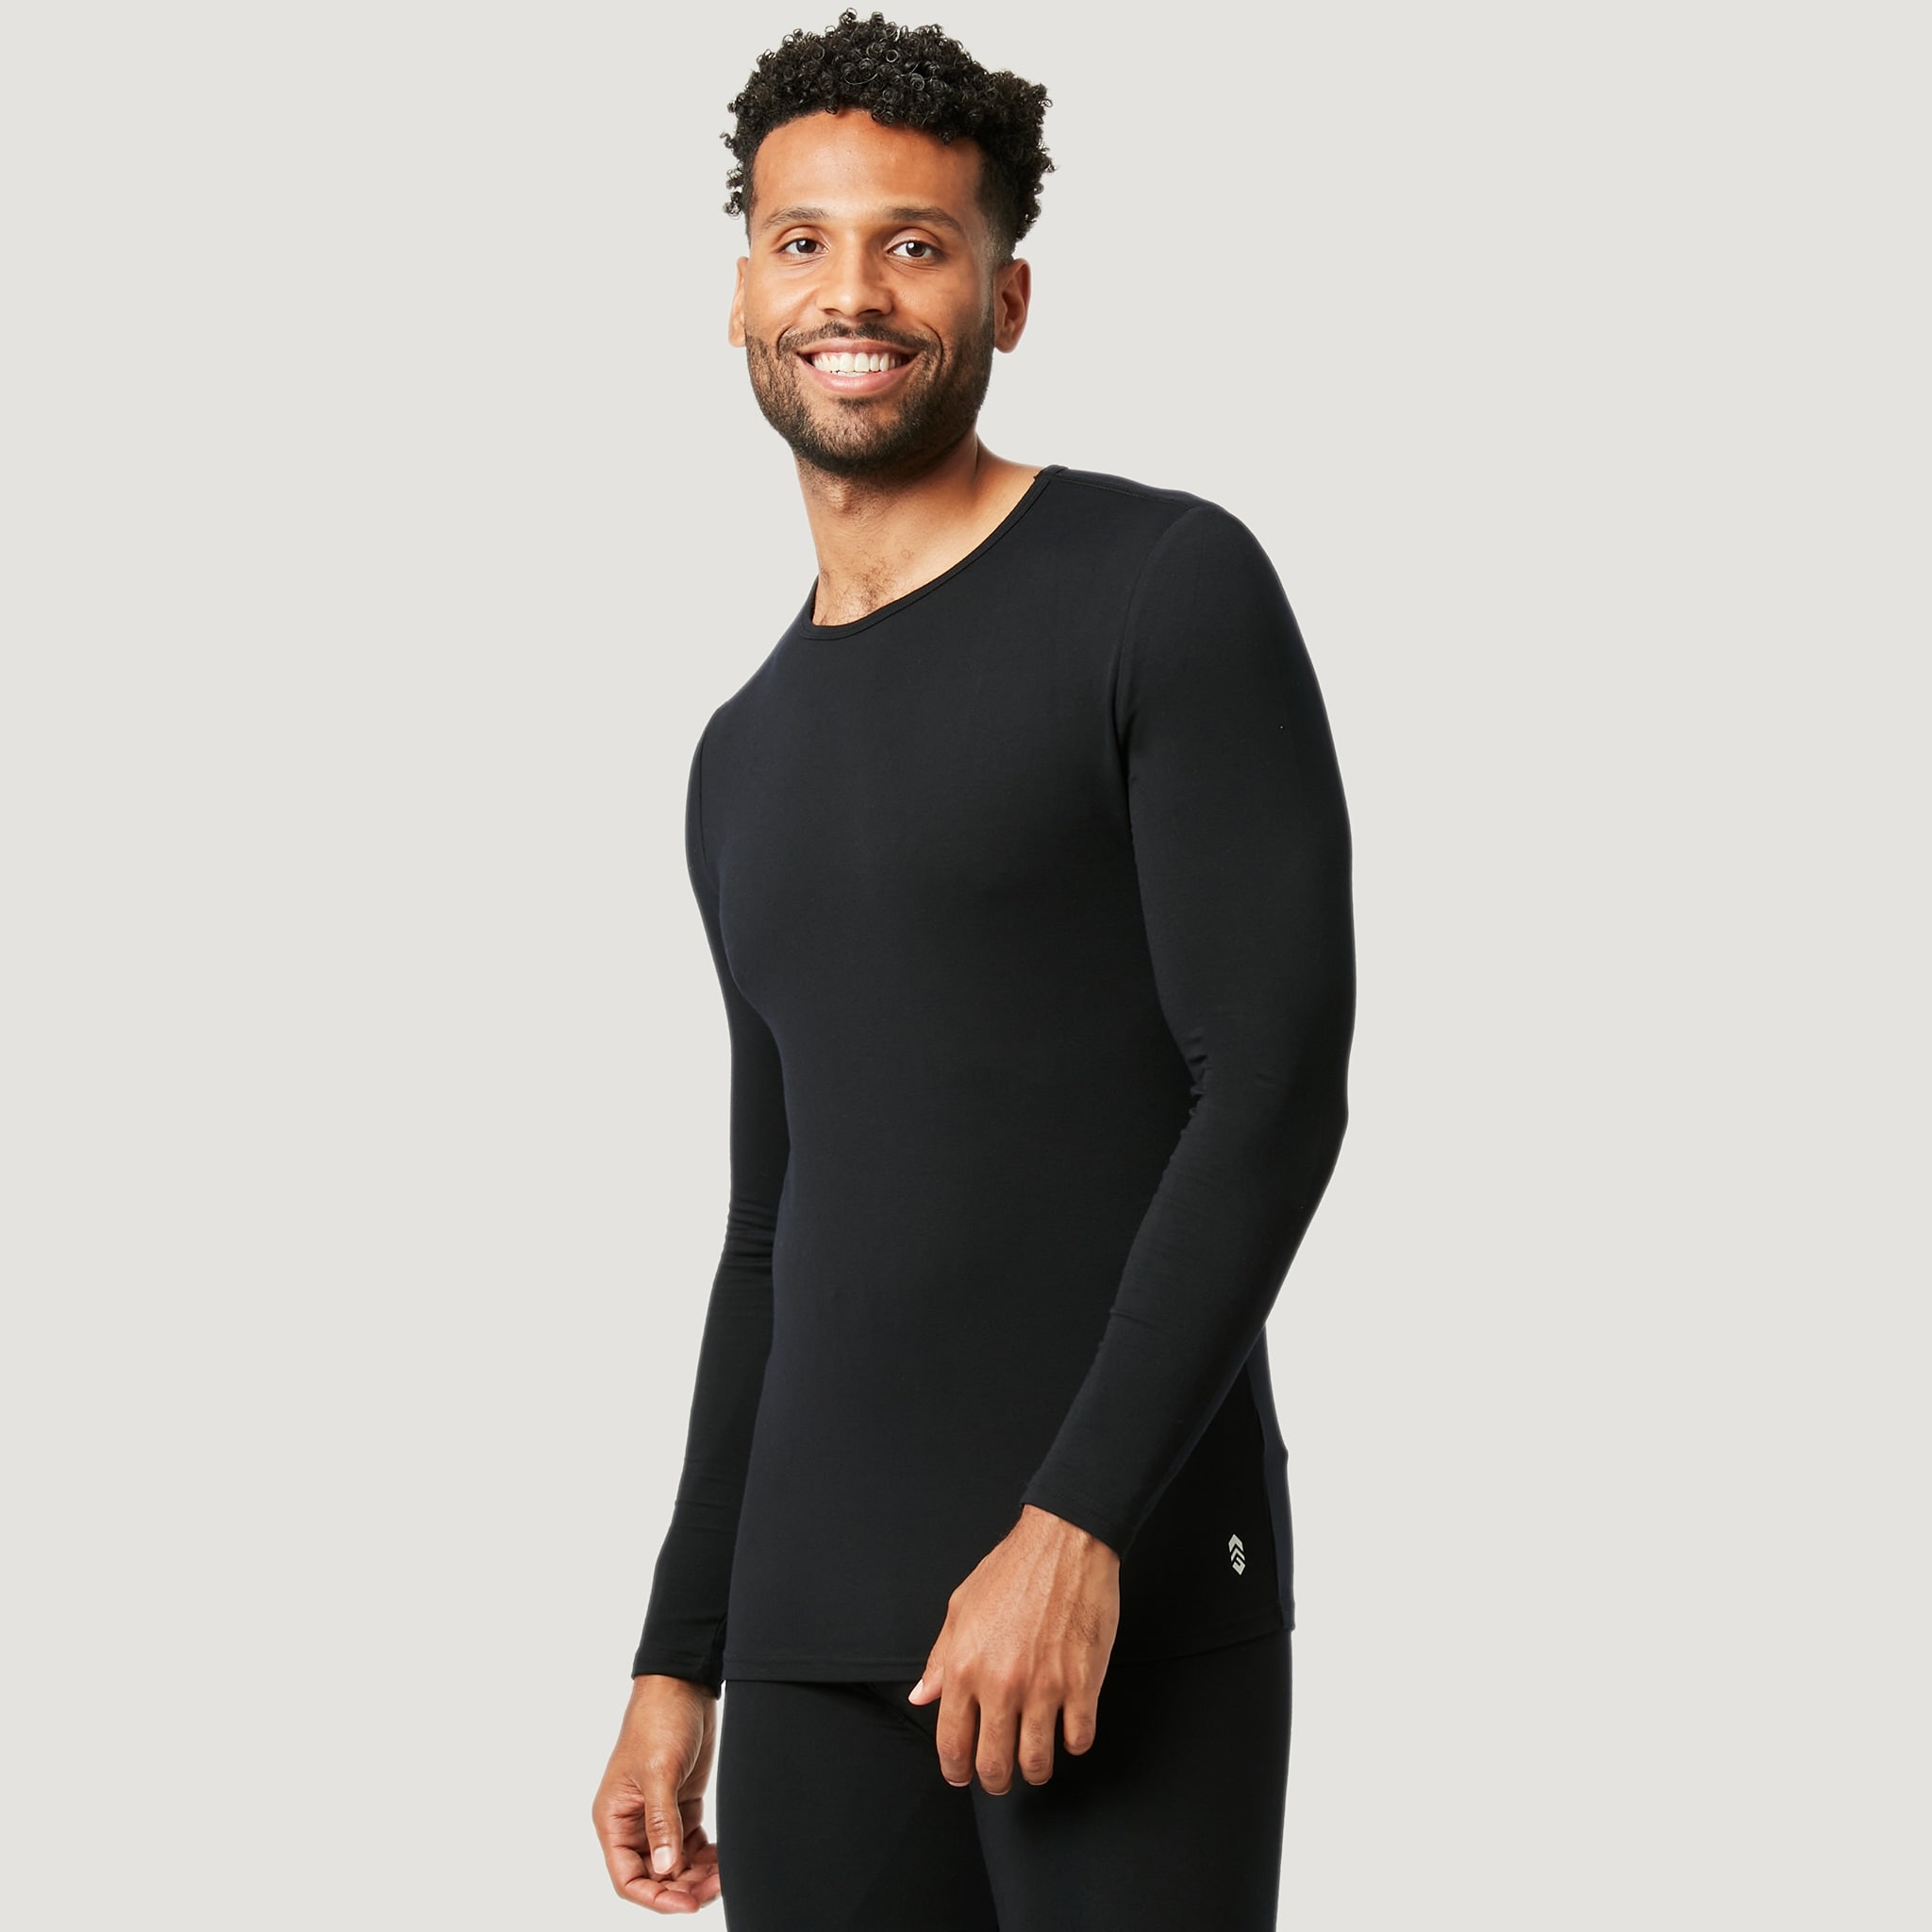 Copper Fit Black Polyester Thermal Base Layer (Large) in the